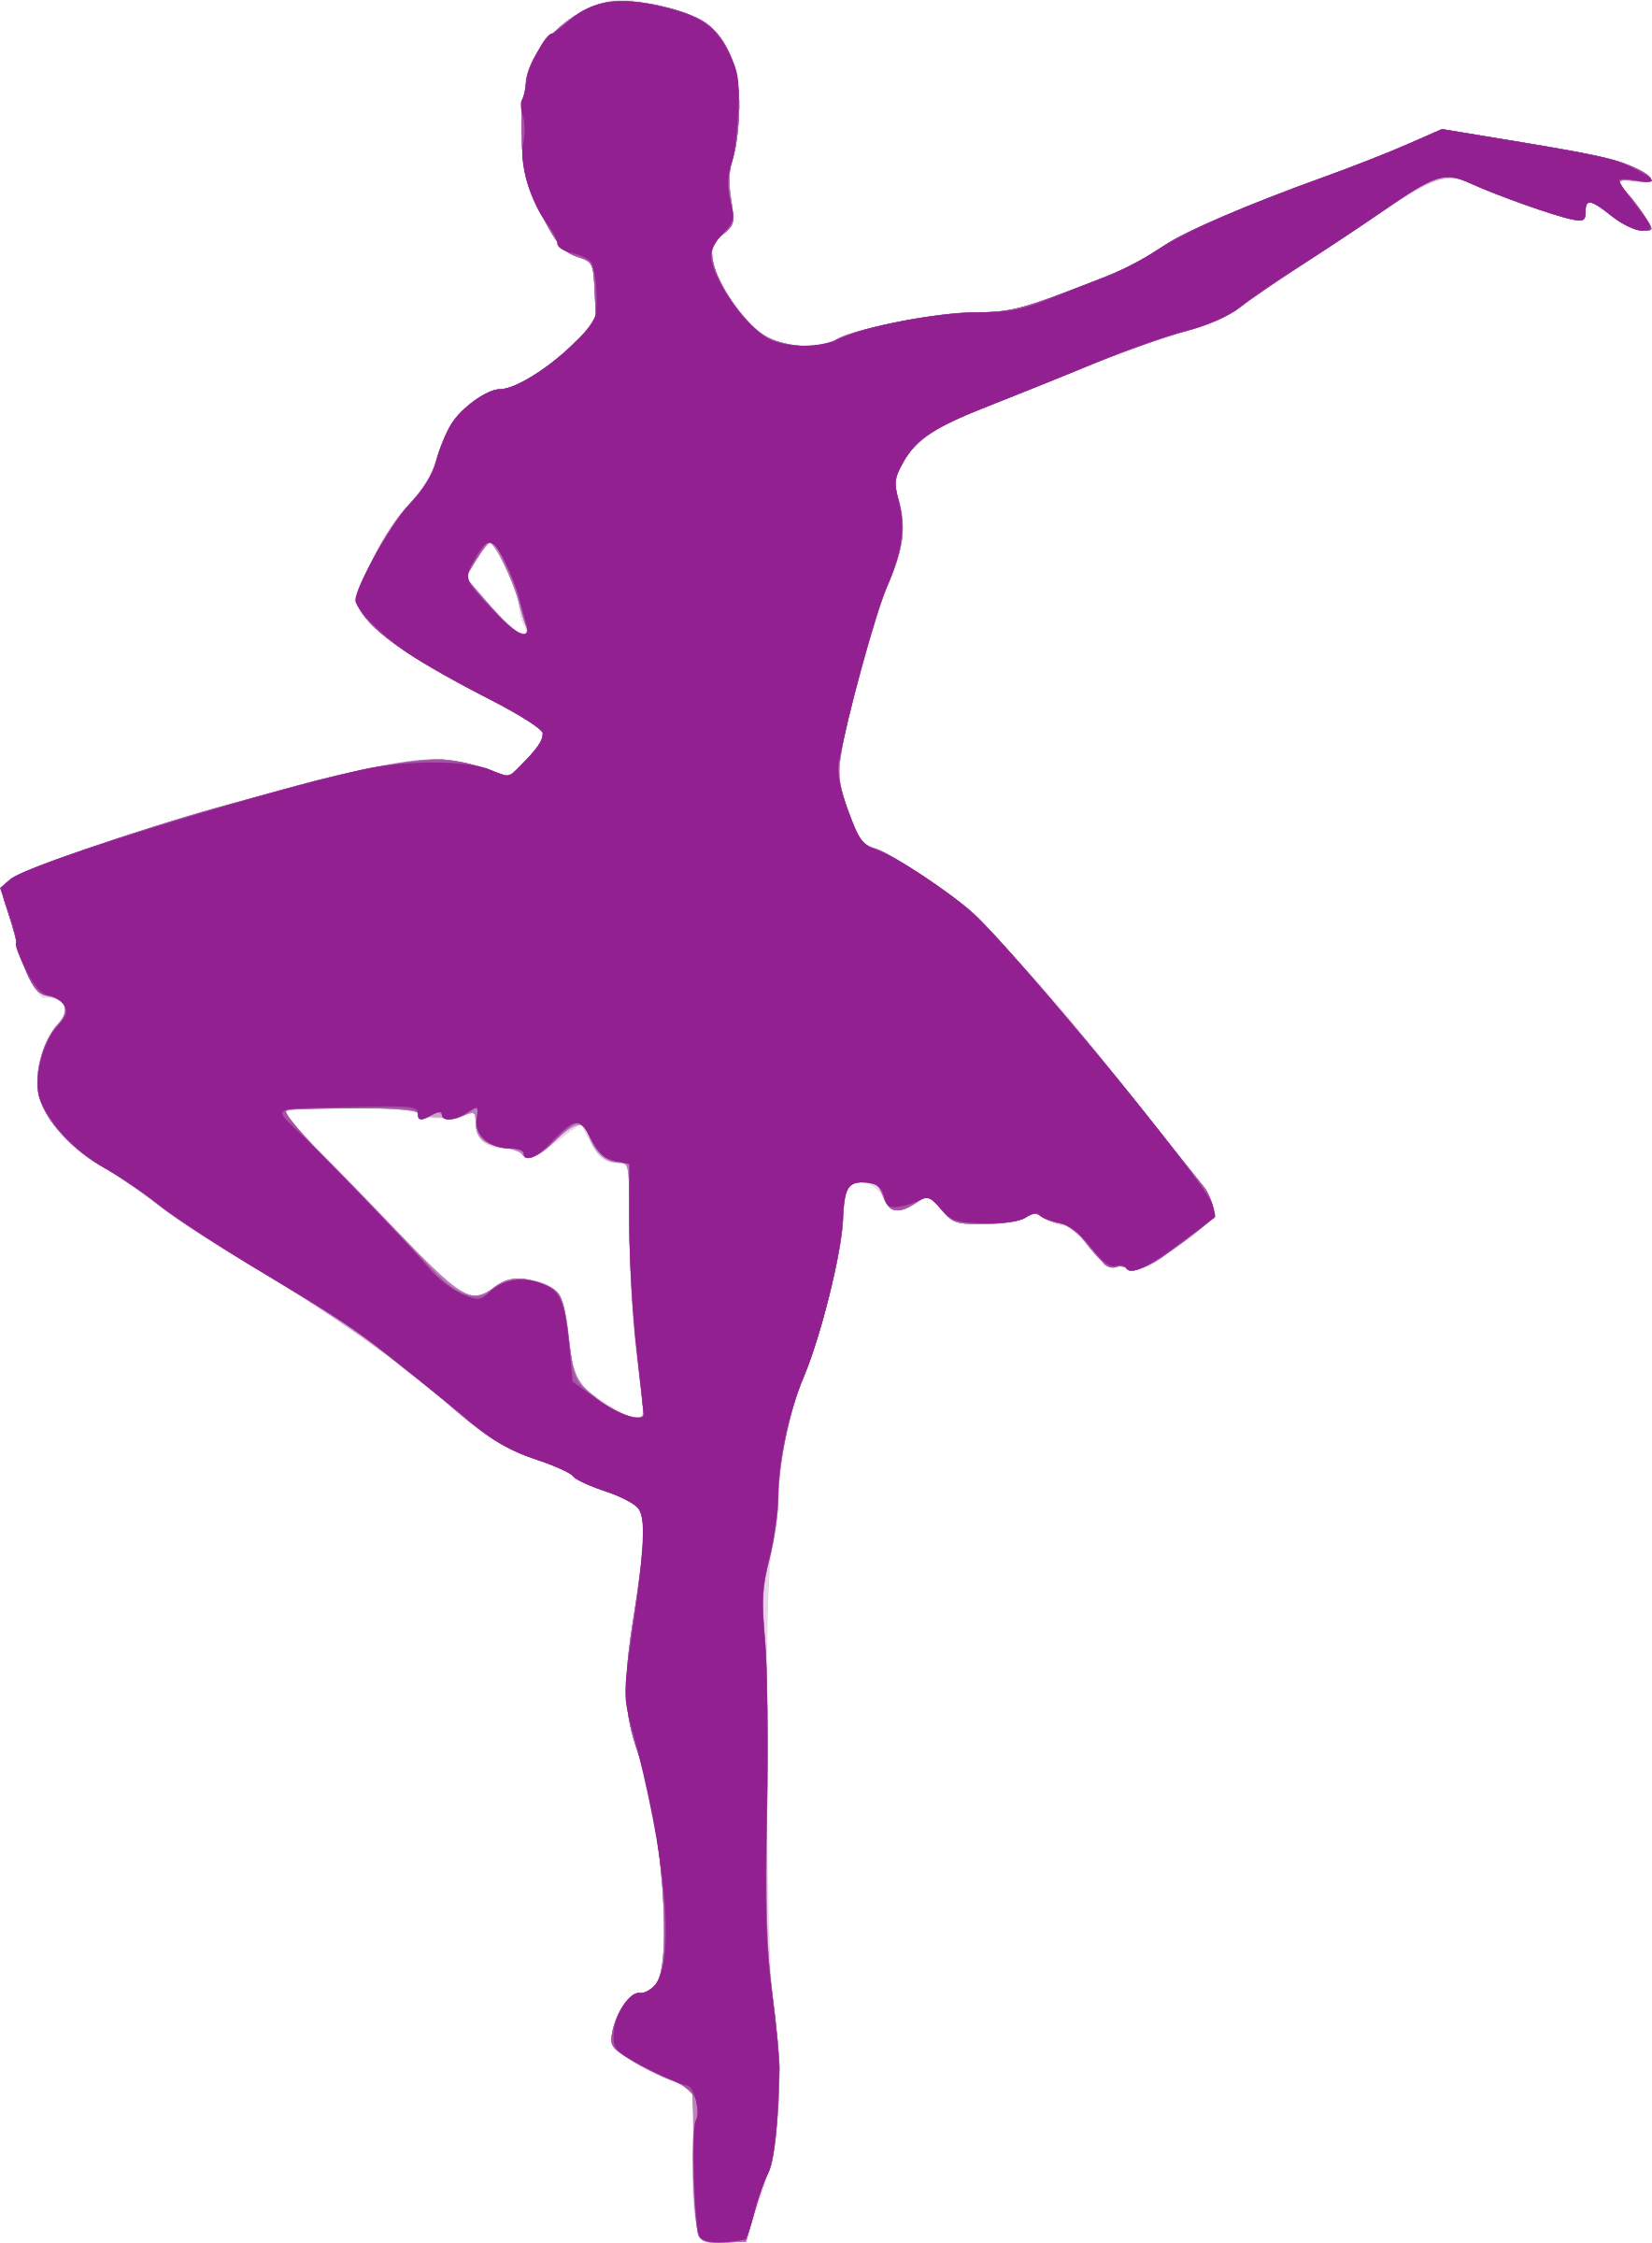 This Free Icons Png Design Of Silhouette Danse